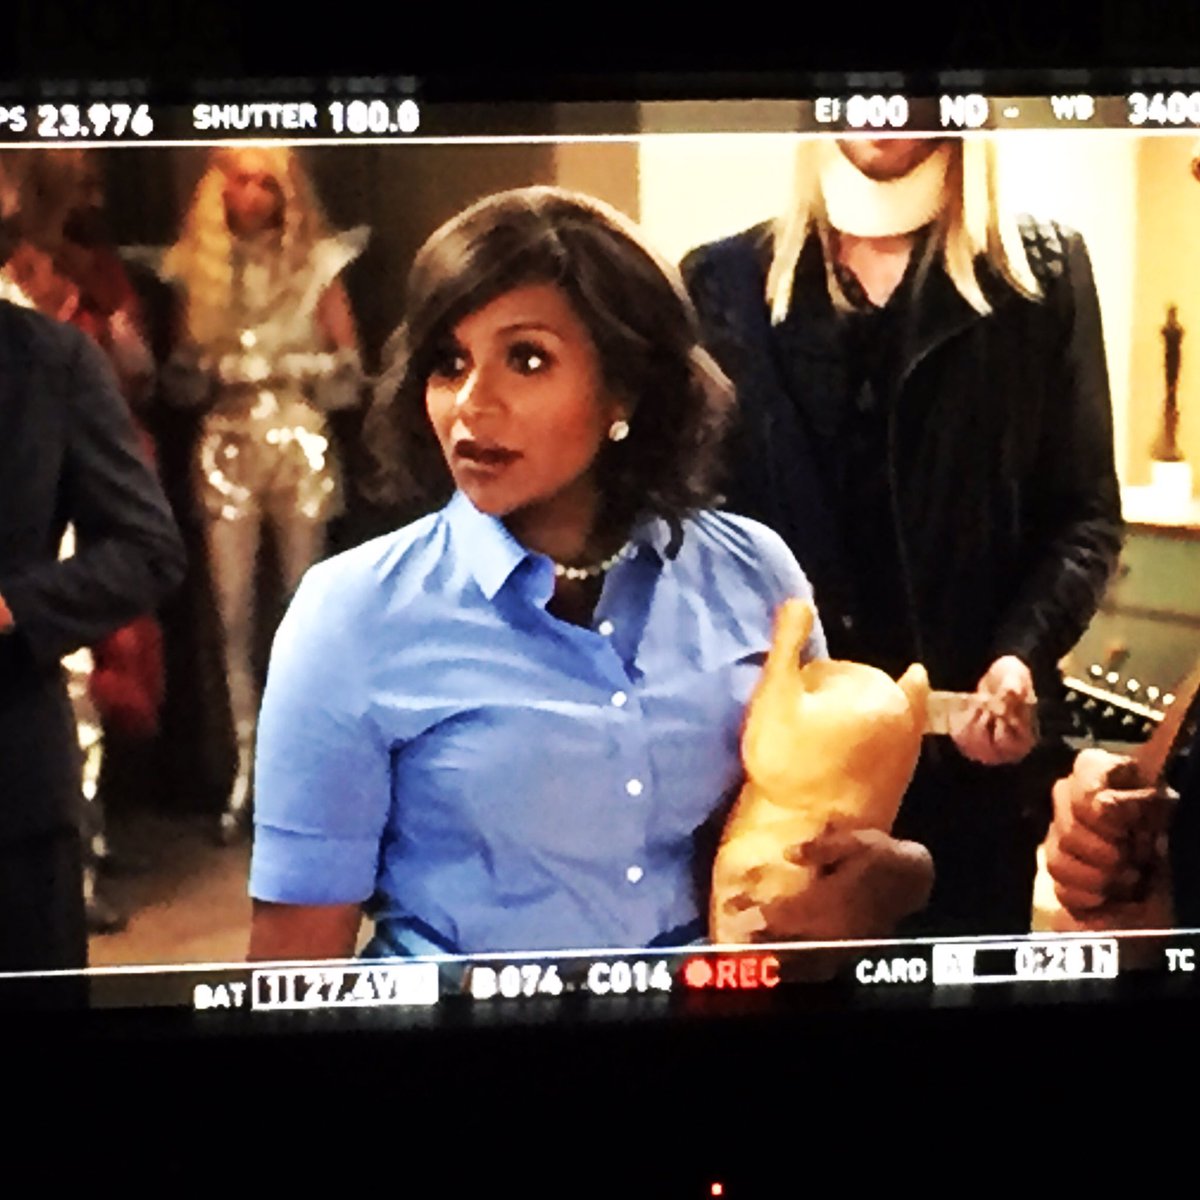 Julia Child with Ricki and The Flash behind me. #TheMindyProject https://t.co/Pj2f4LOFjv